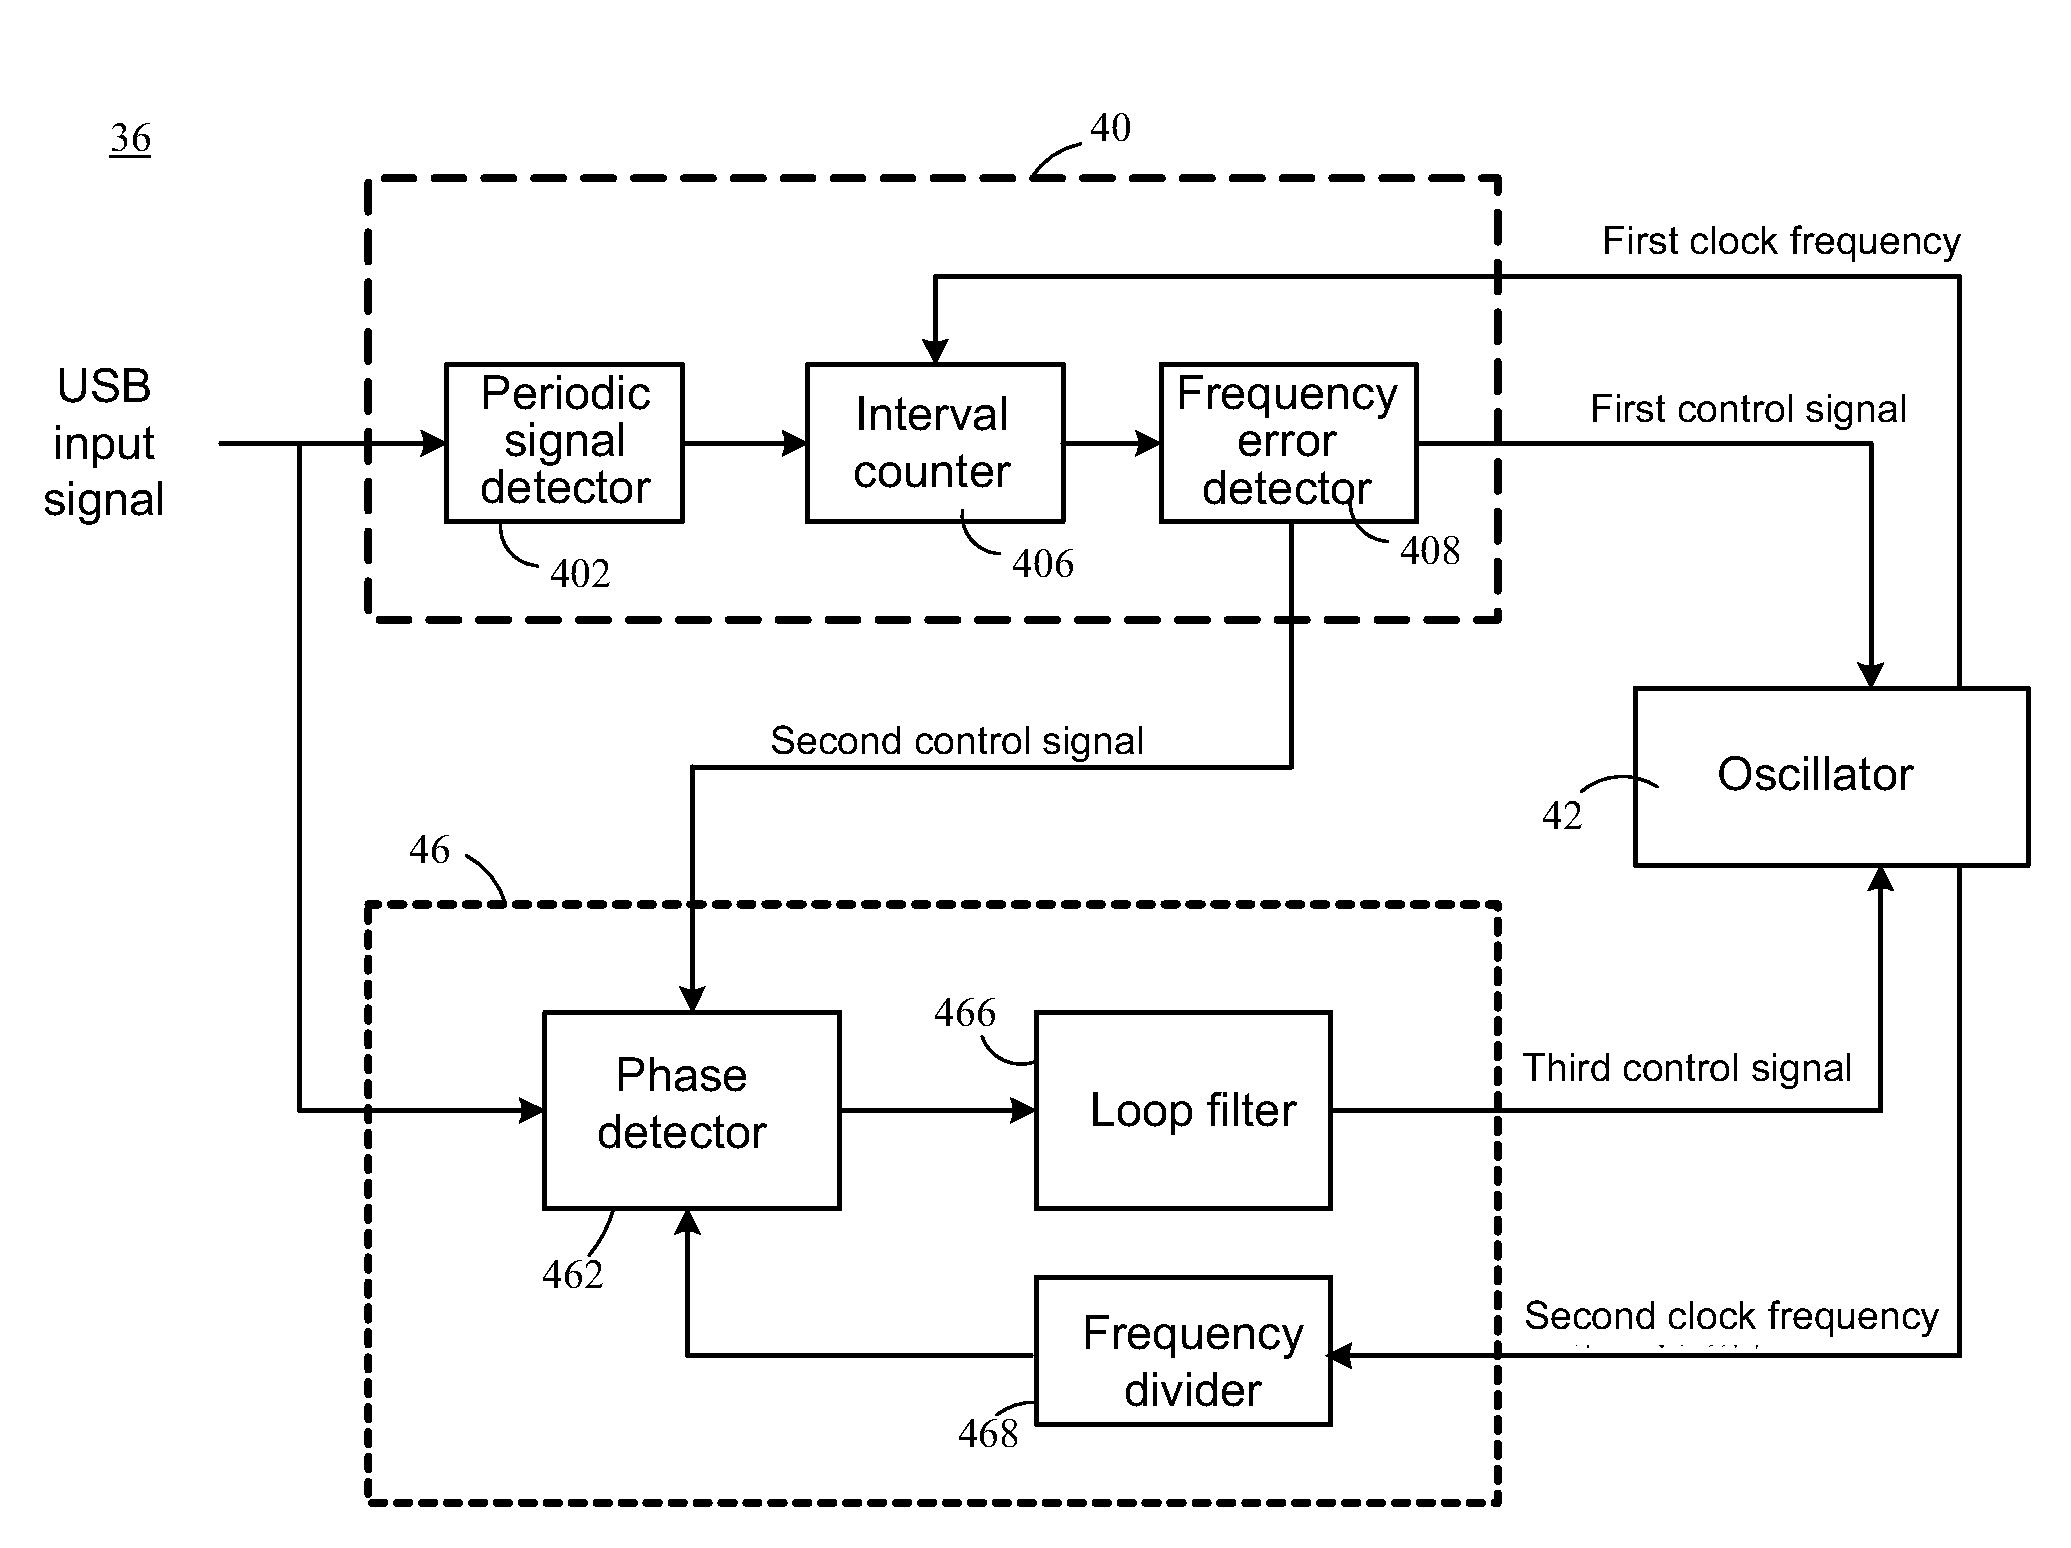 Serial bus clock frequency calibration system and method thereof